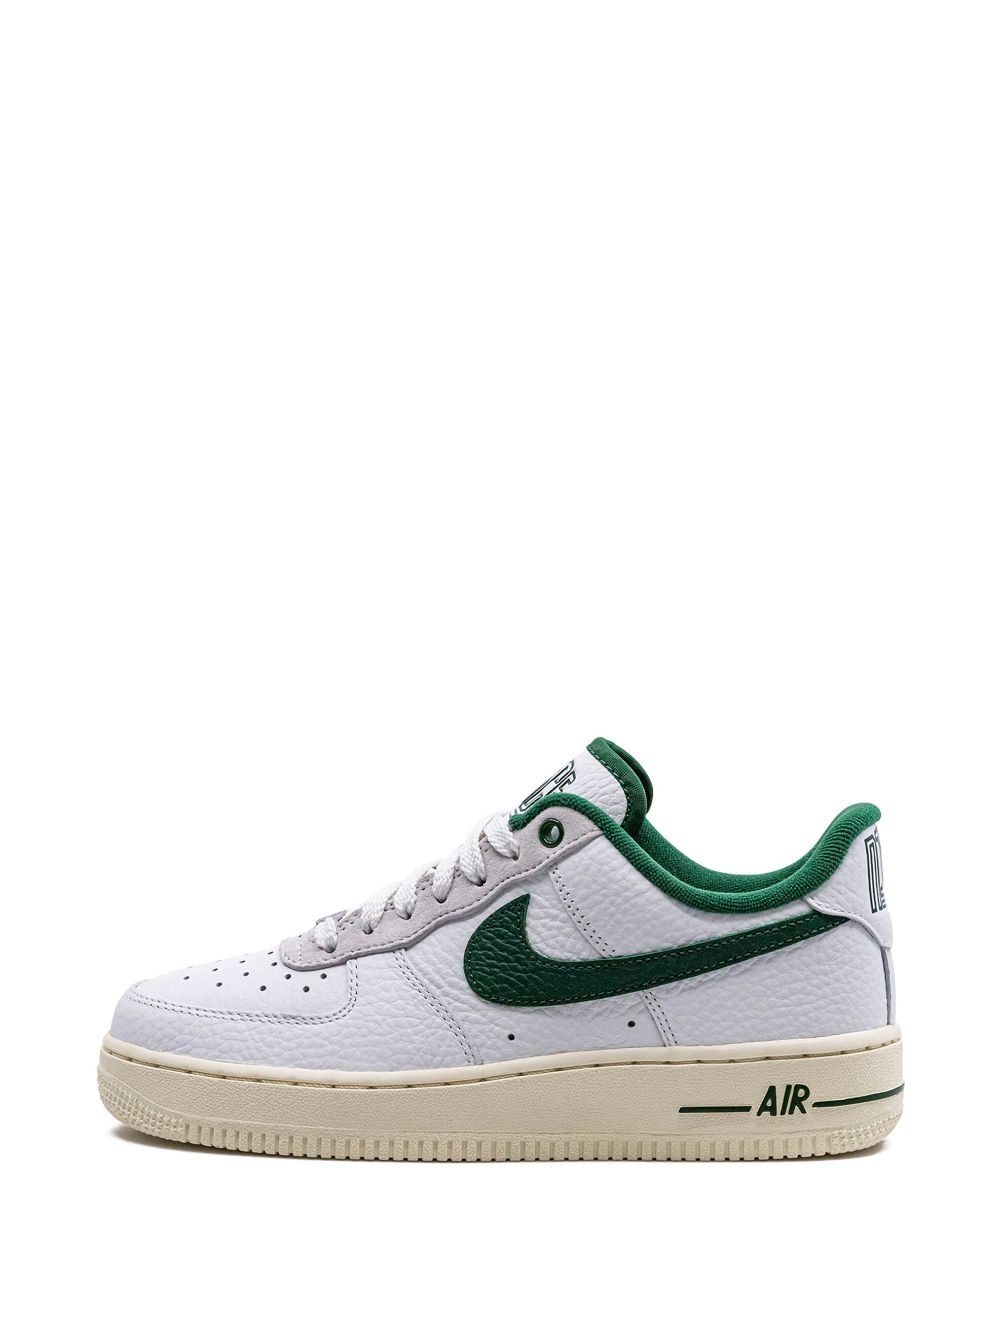 Air Force 1 '07 "Command Force Gorge Green" sneakers - 5